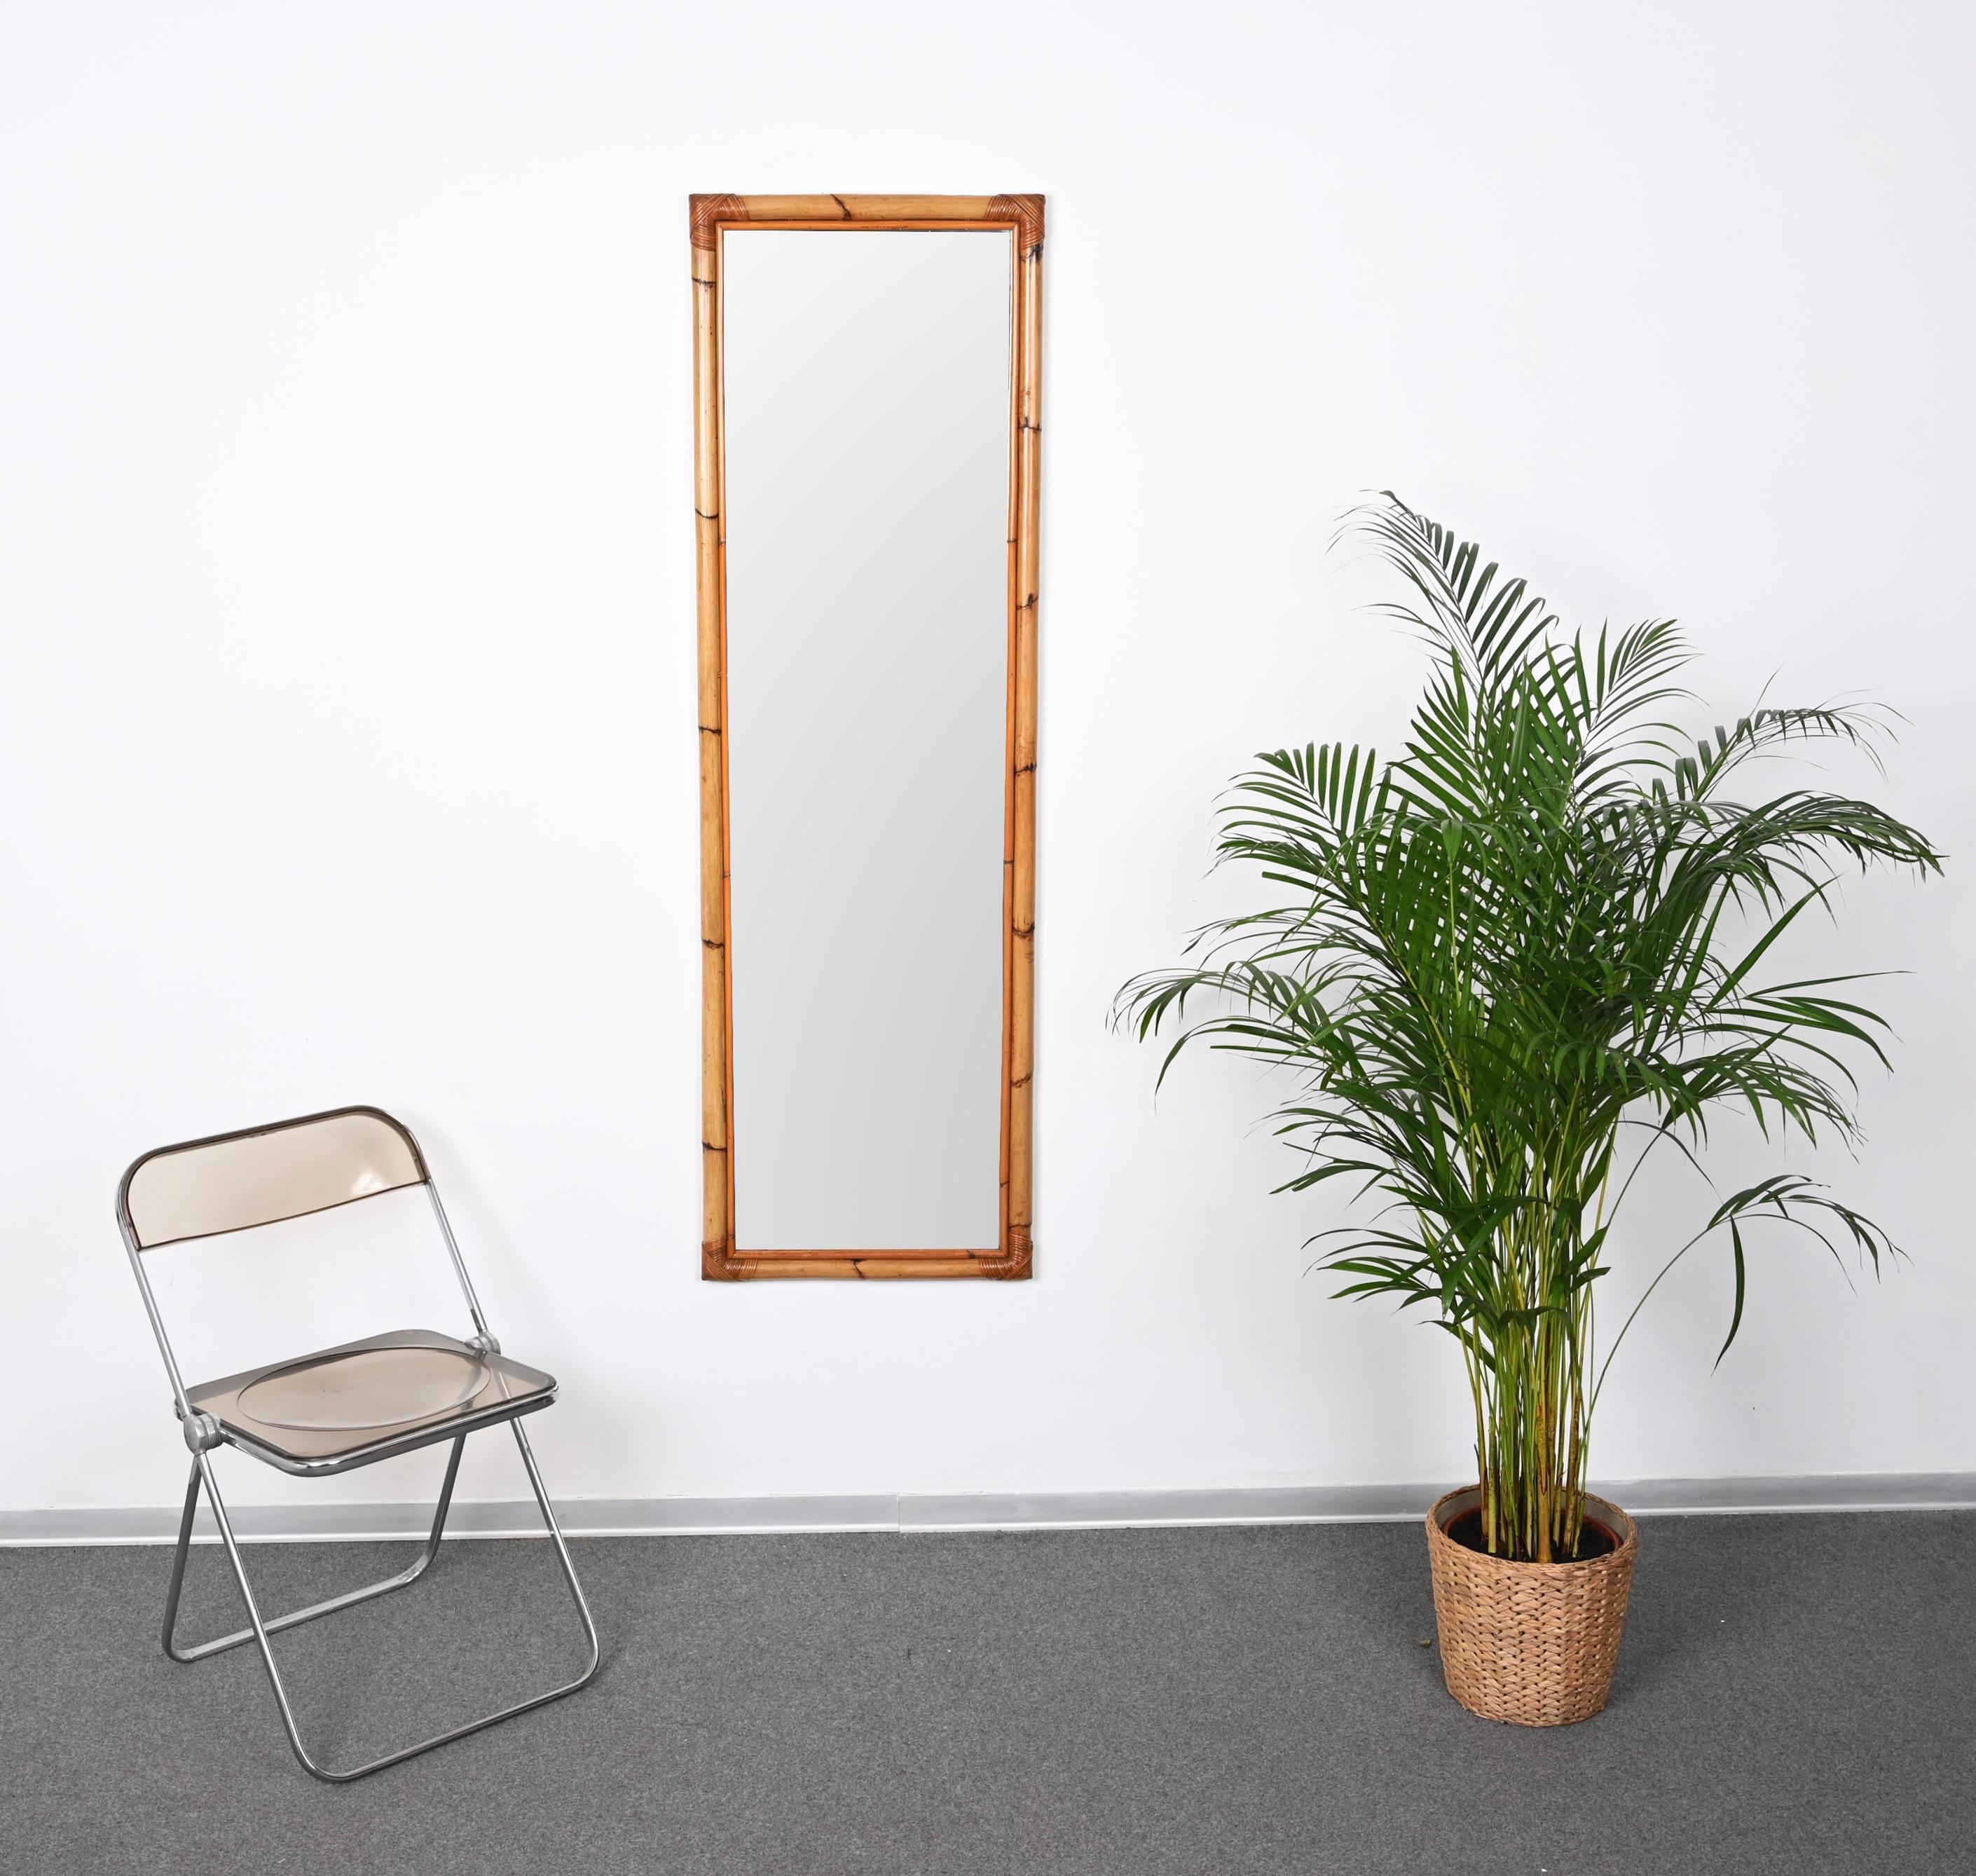 Stunning full lenght midcentury rectangular bamboo and woven wicker mirror. This gorgeous piece was designed in Italy during the 1970s.

This sturdy mirror has a wonderful double frame in bamboo with the corners decorated with beautiful weaved